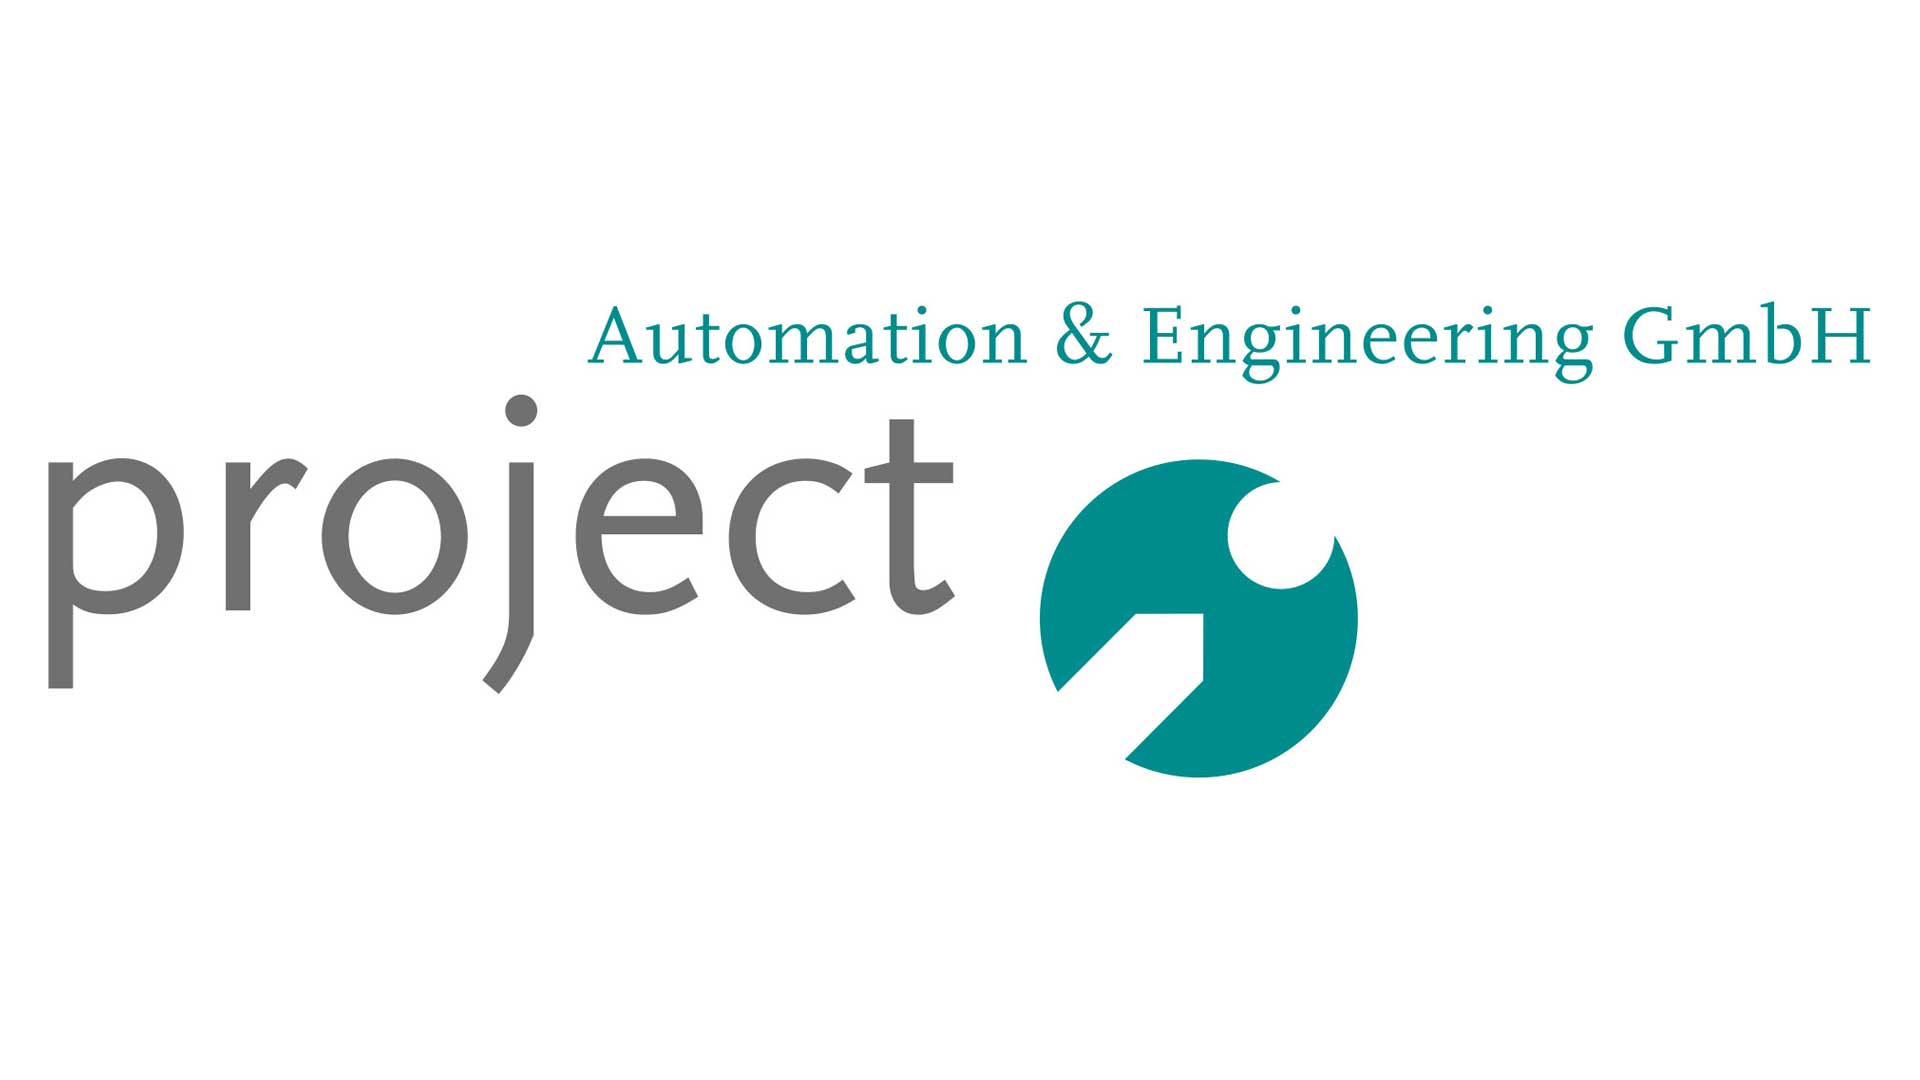 project Automation & Engineering GmbH